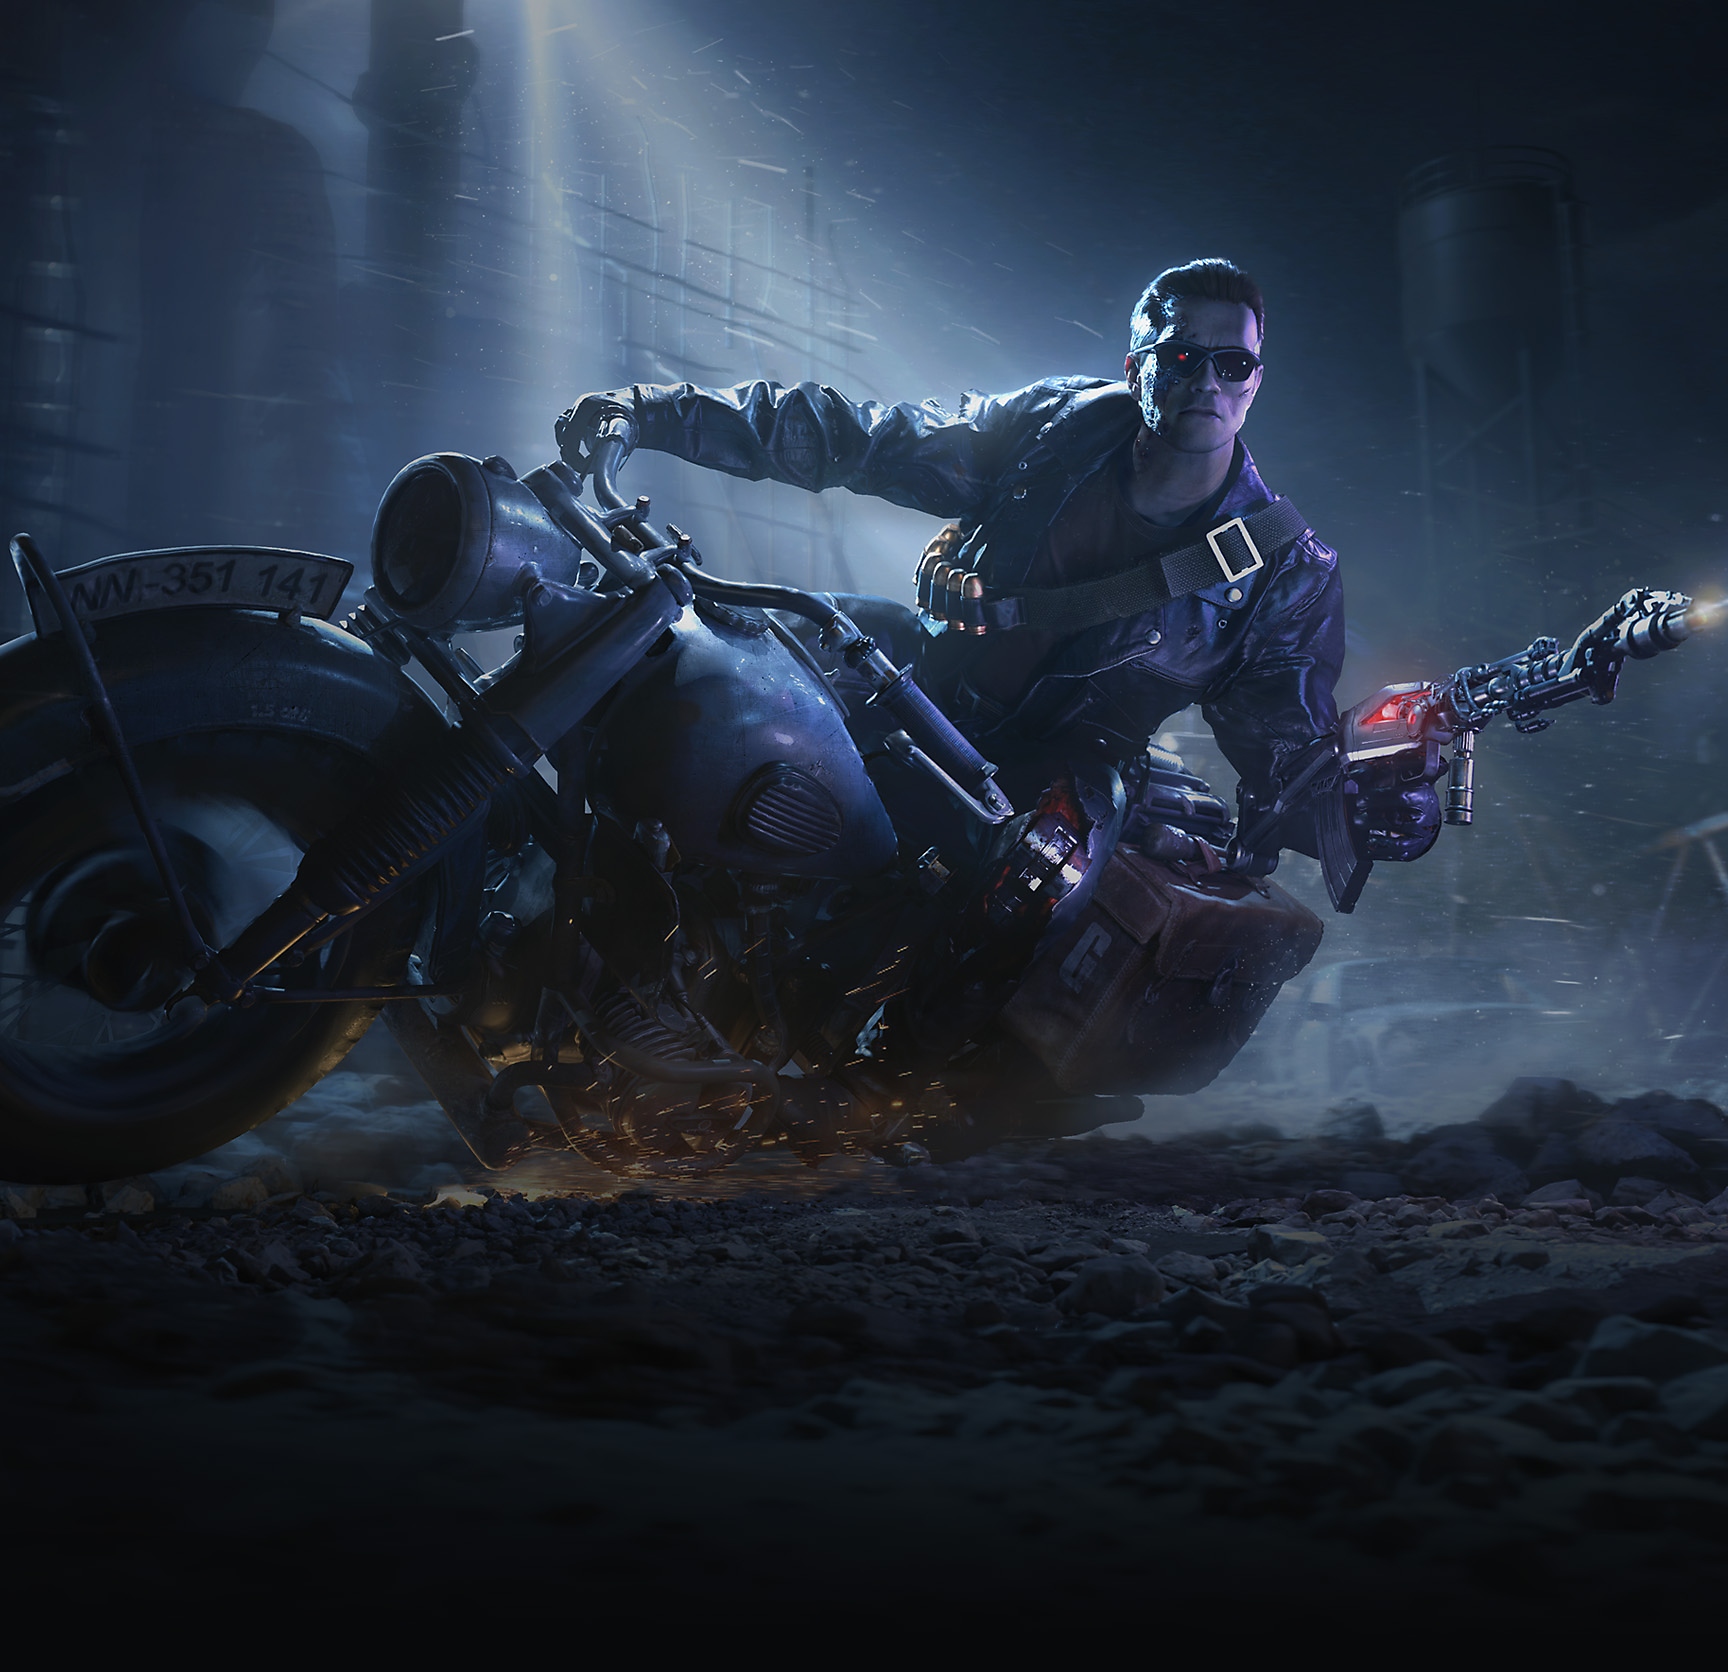 T-800 Limited Time Bundle artwork featuring The Terminator T-800 riding a motorcycle